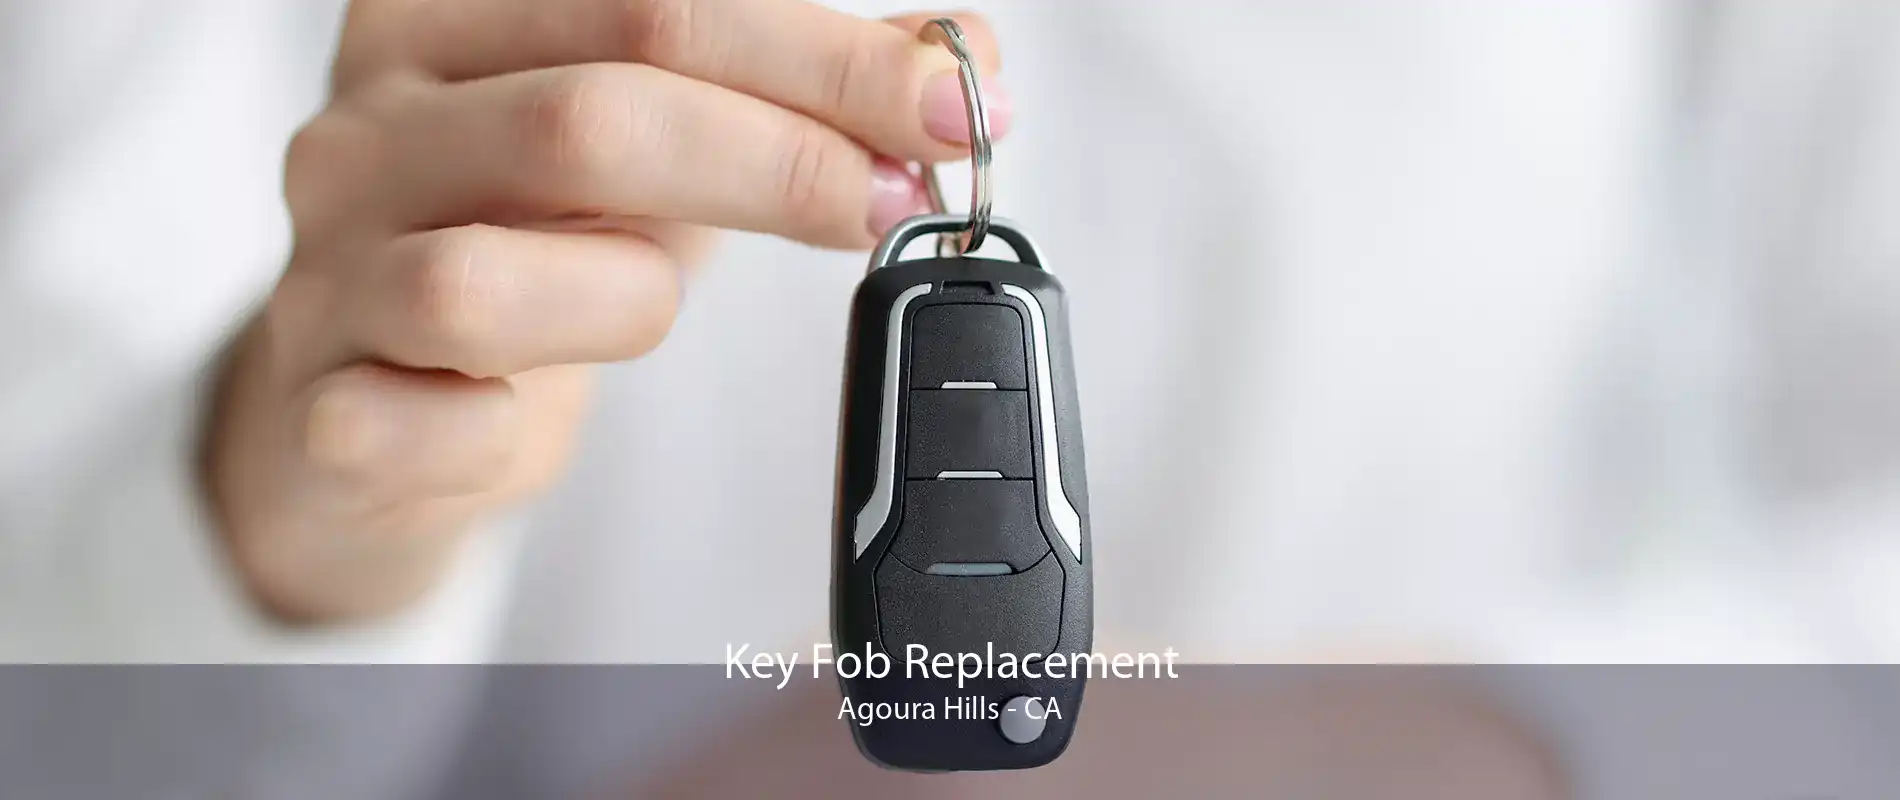 Key Fob Replacement Agoura Hills - CA